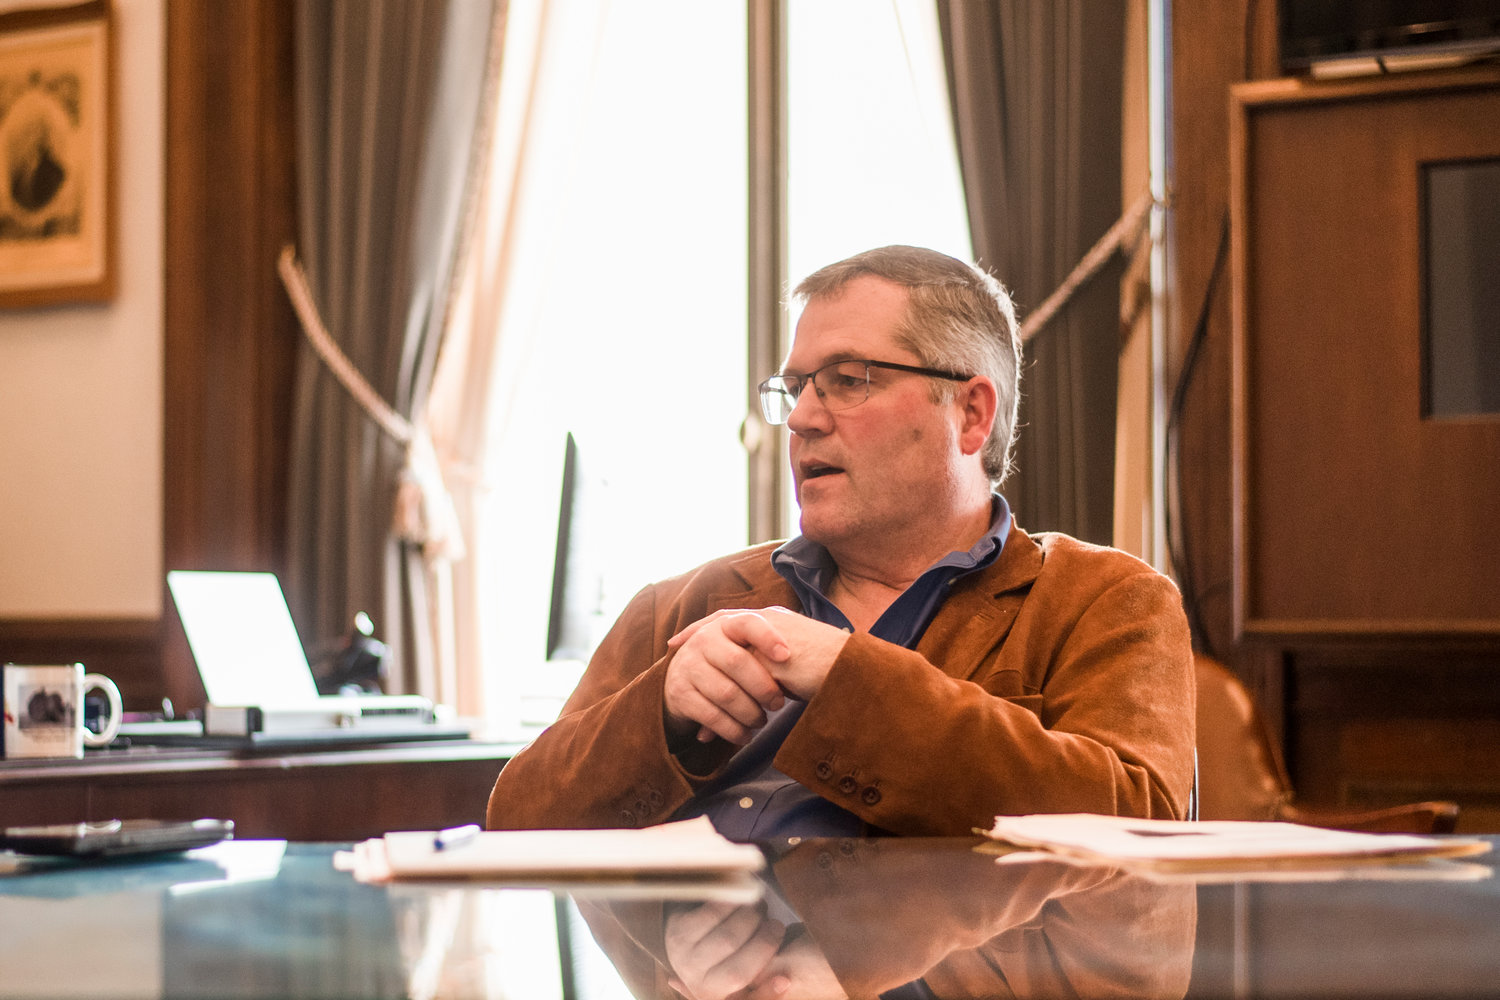 State Rep. J.T. Wilcox, author of this commentary, talks during an interview inside his office at the state Capitol in 2019.